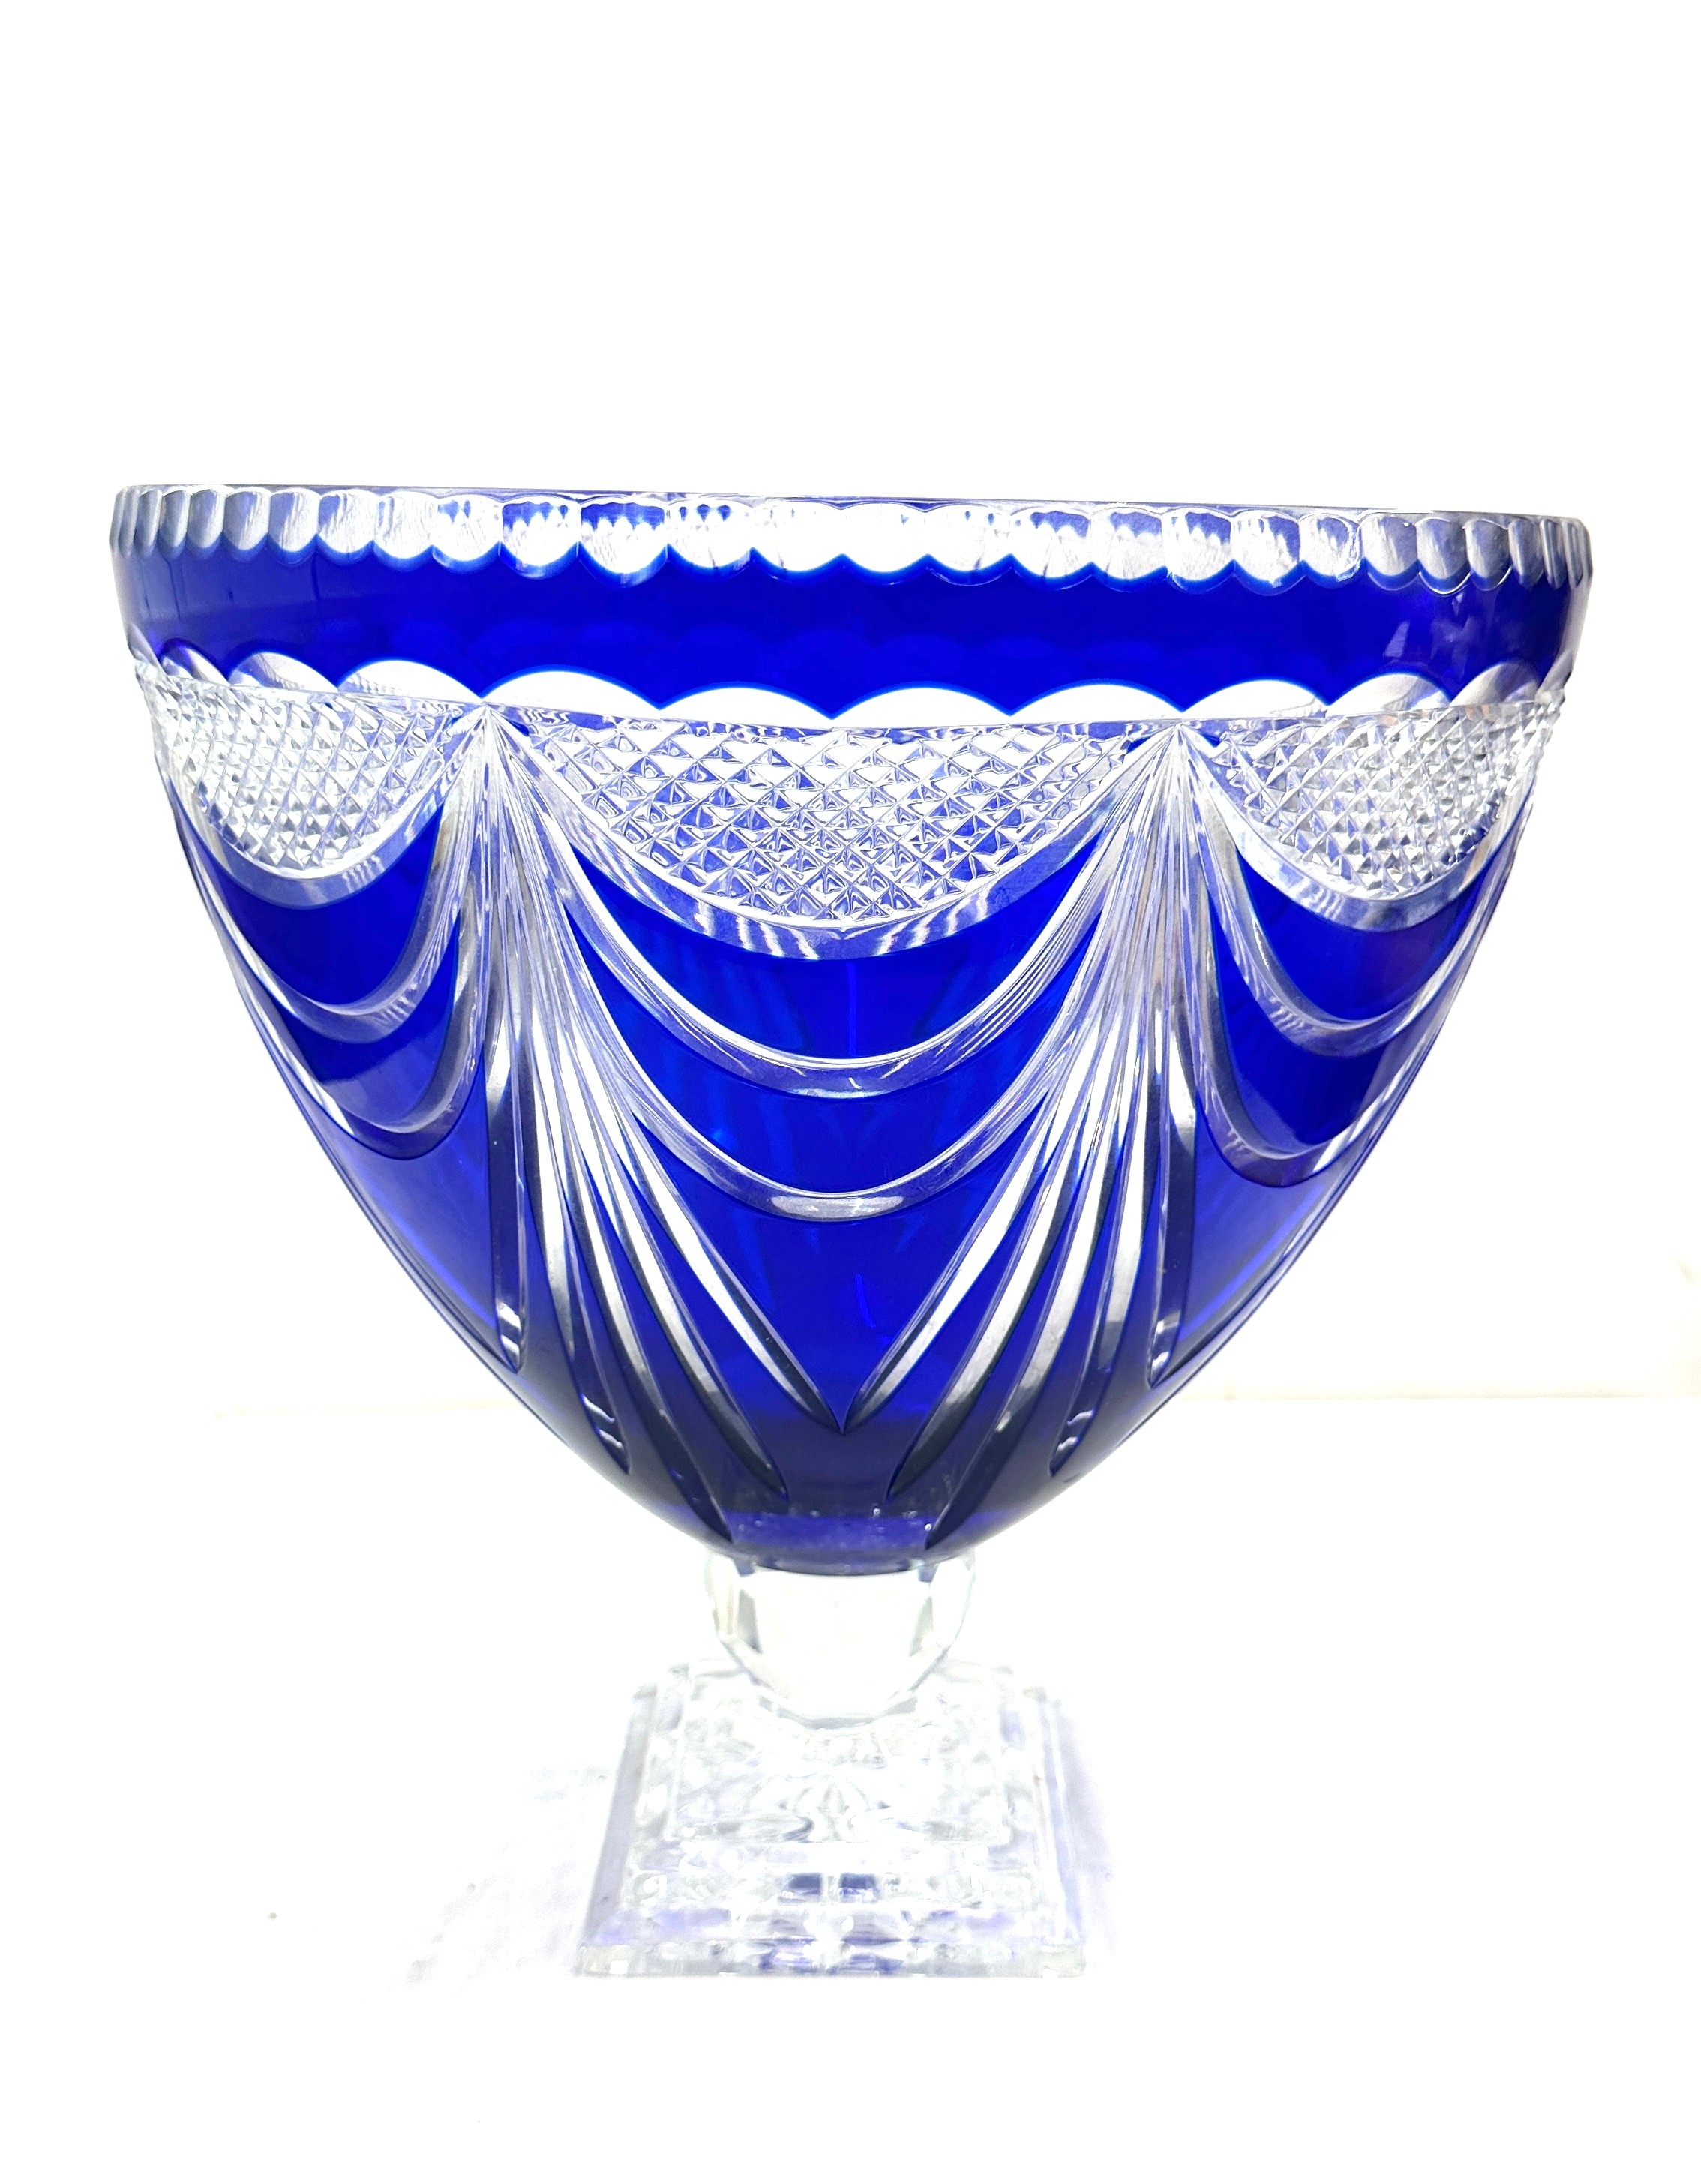 Large blue glass centre piece, overall height 13 inches, Width 12 inches - Bild 2 aus 3